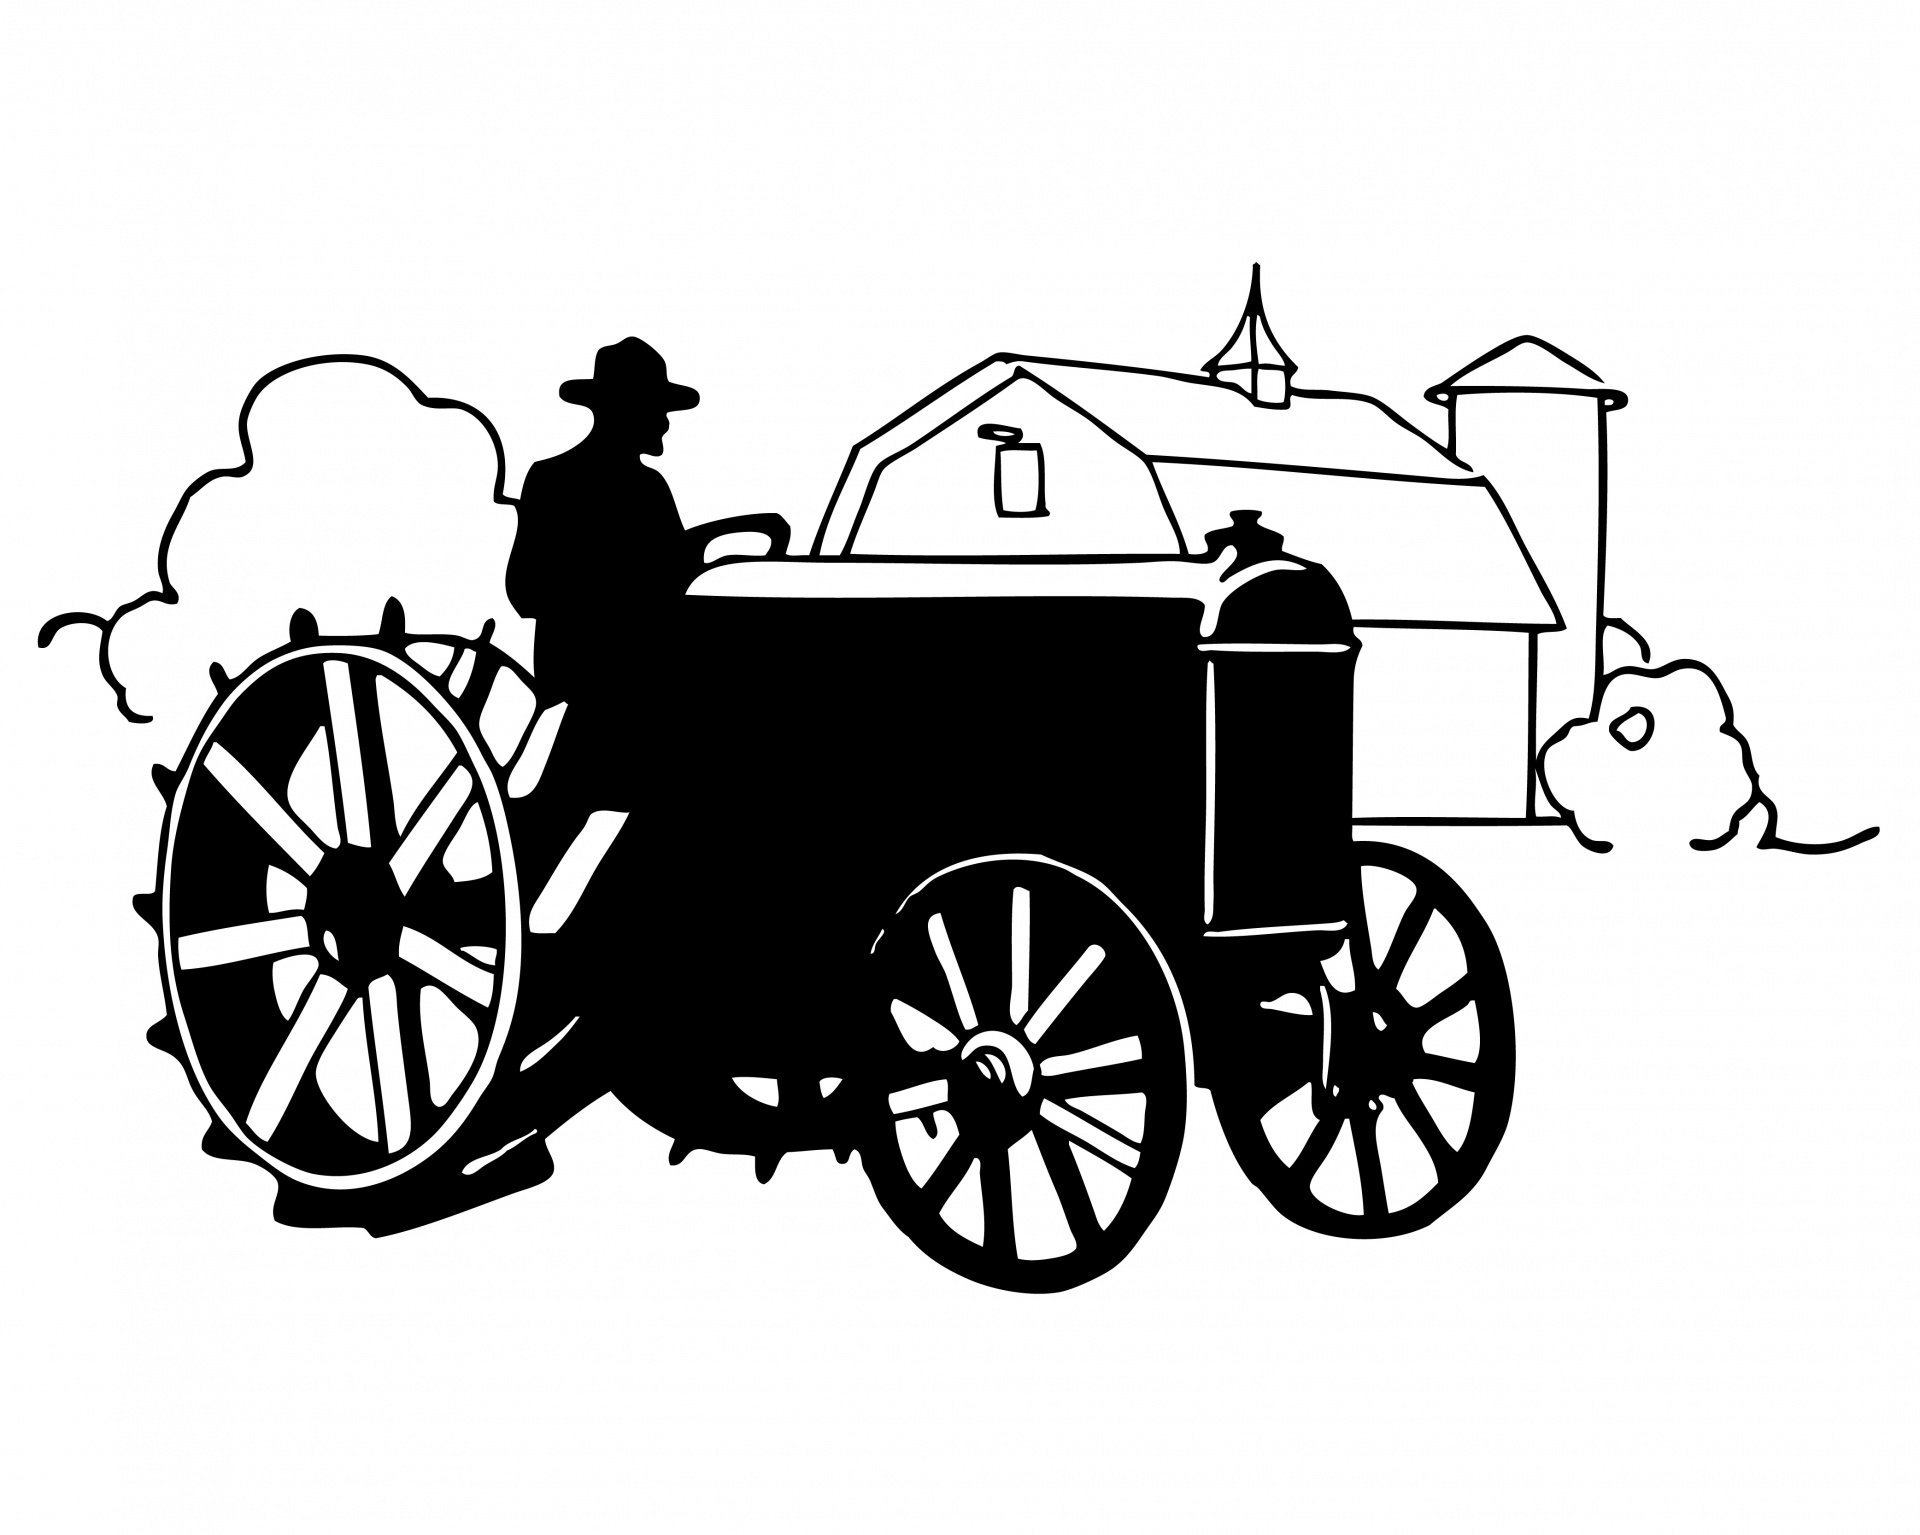 tractor farming clipart black and white see more tractor farming clipart black and white